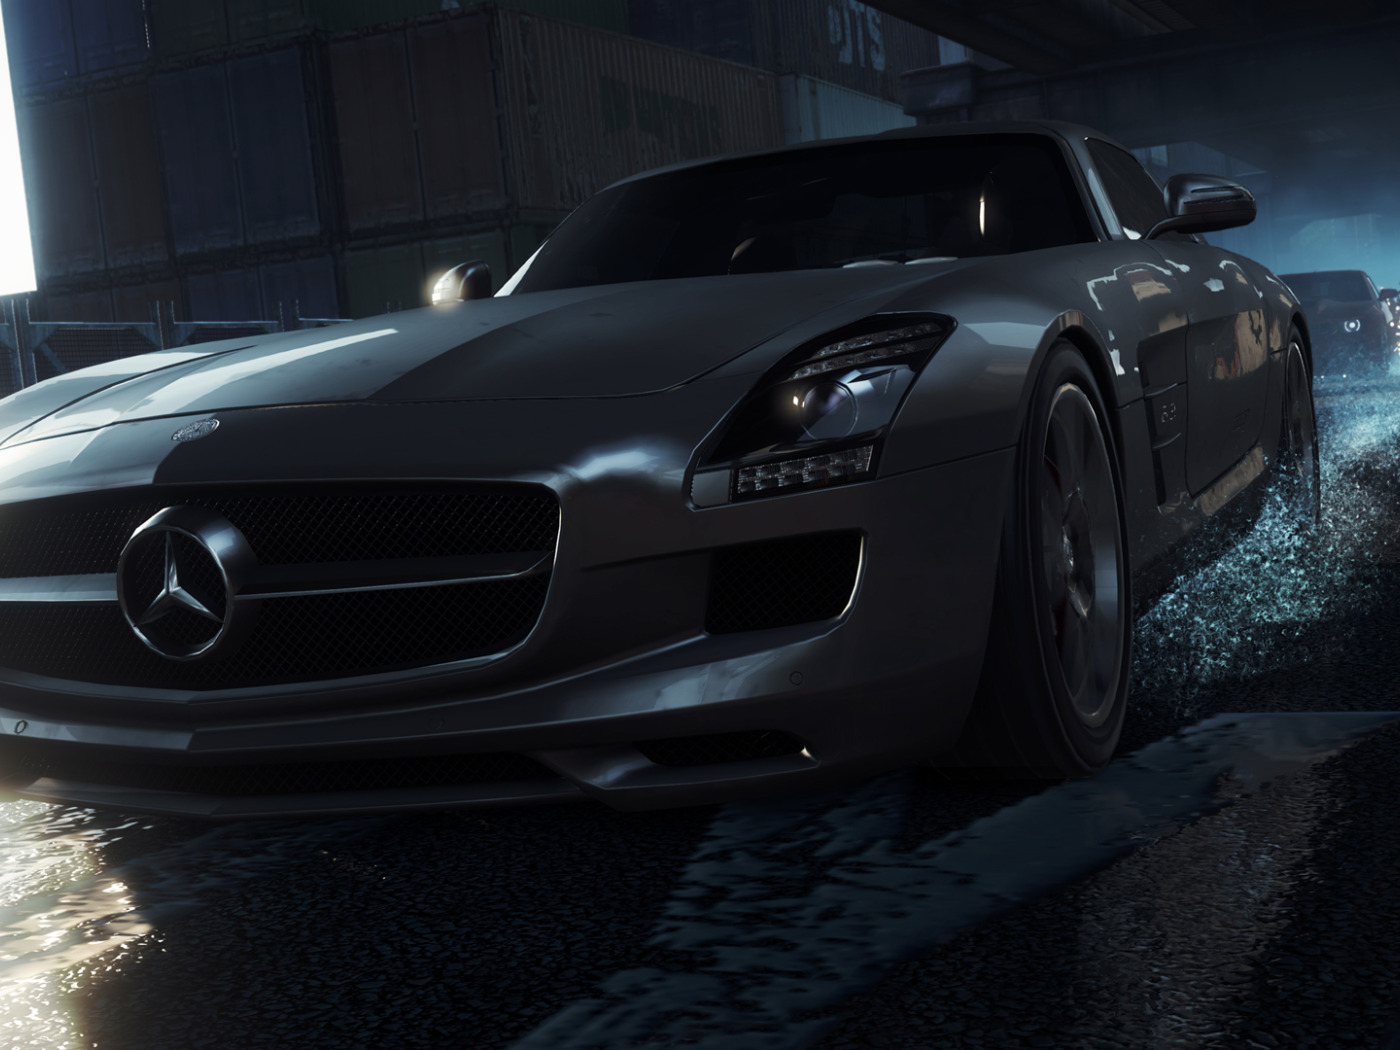 Need for Speed most wanted 2012. Mercedes Benz NFS most wanted 2012. Нфс most wanted 2012. Mercedes SL 65 most wanted 2012.